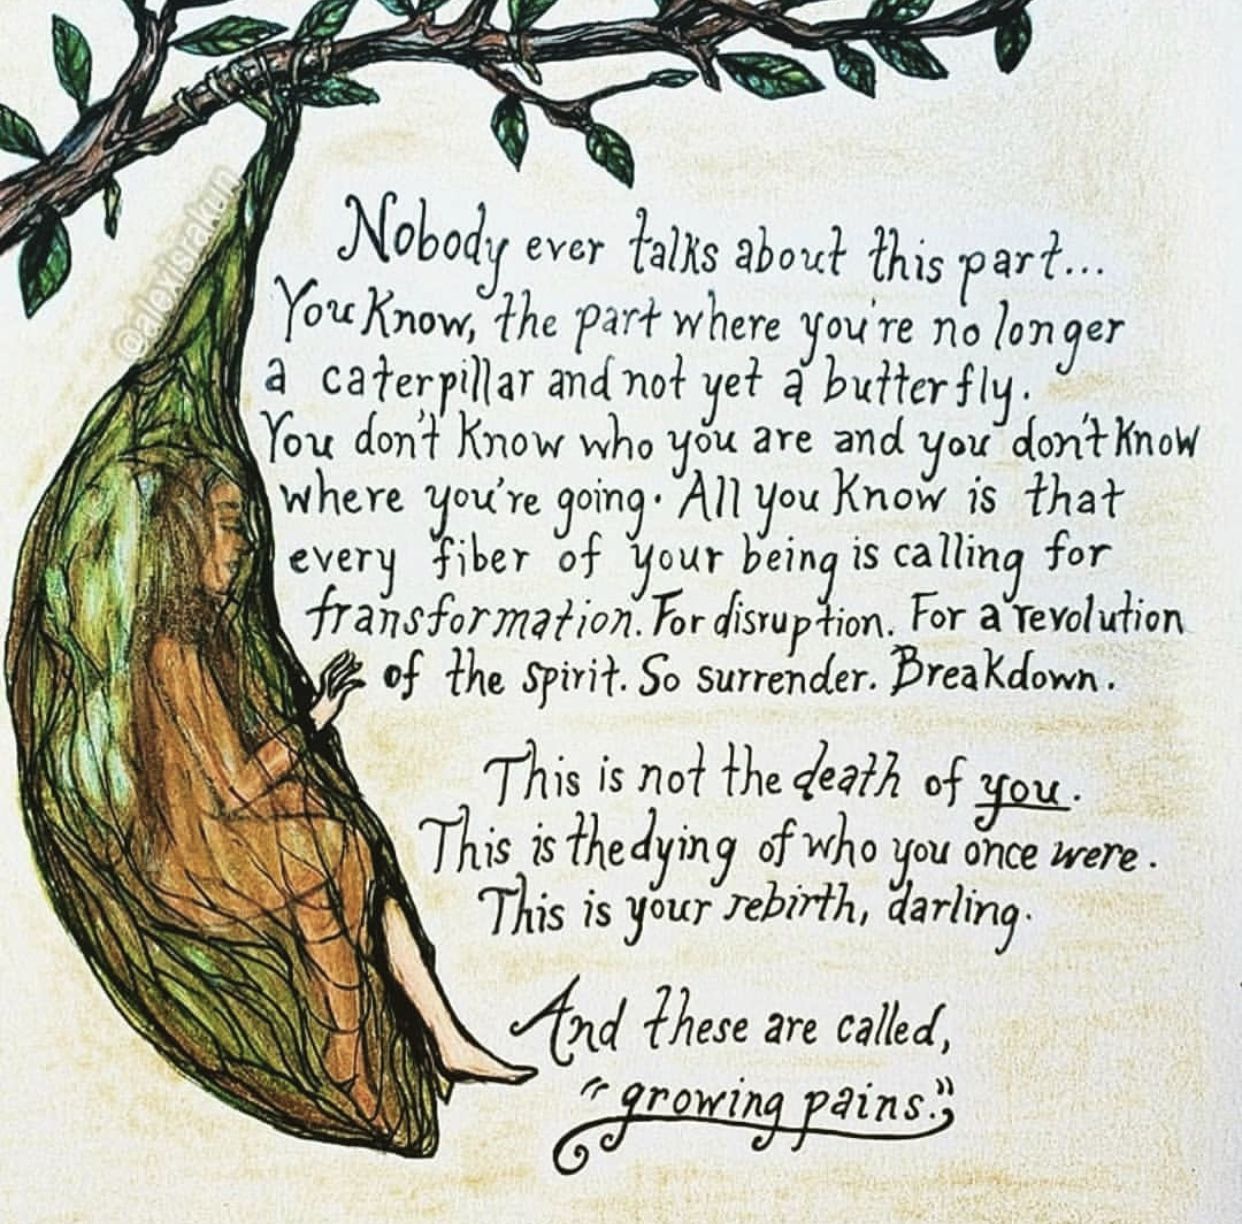 A hand-drawn image of a cocoon hanging from a branch. A woman is beginning to emerge from the cocoon. Text overlays the image: Nobody every talks about this part...You know, the part where you're no longer a catepillar and not yet a butterfly. You don't know who you are and you don't know where you're going. All you know is that every fiber of your being is calling for a transformation. For disruption. For a revolution of the spirit. So surrender. Breakdown. This is not the death of *you*. This is the dying of who you once were. This is your rebirth, darling. And these are called 'growing pains'.